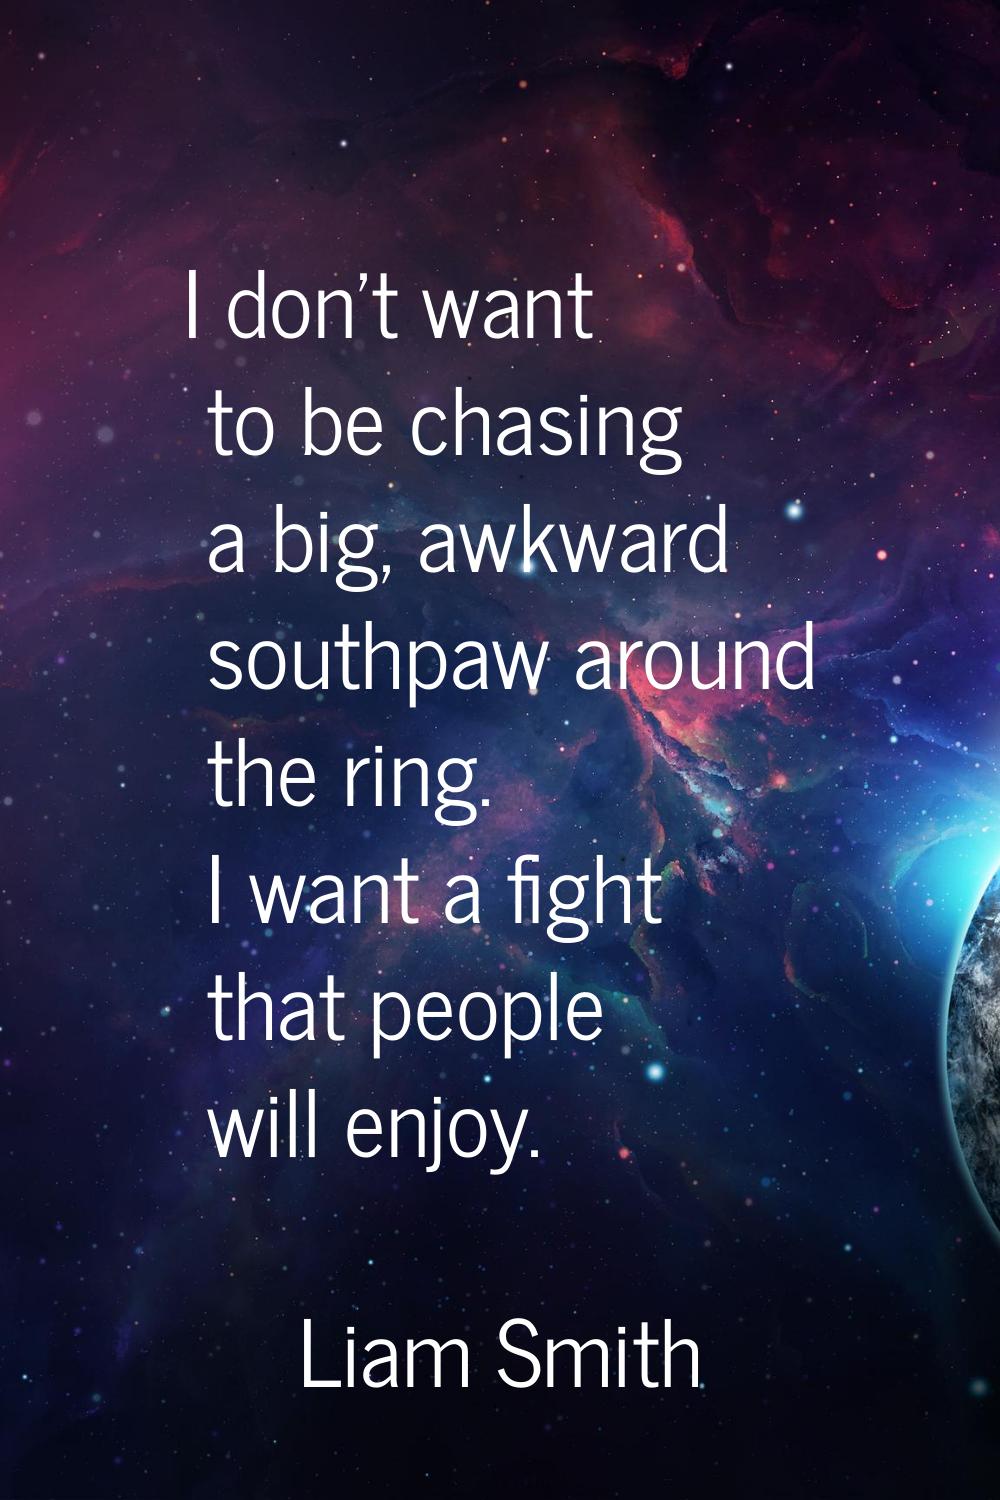 I don't want to be chasing a big, awkward southpaw around the ring. I want a fight that people will